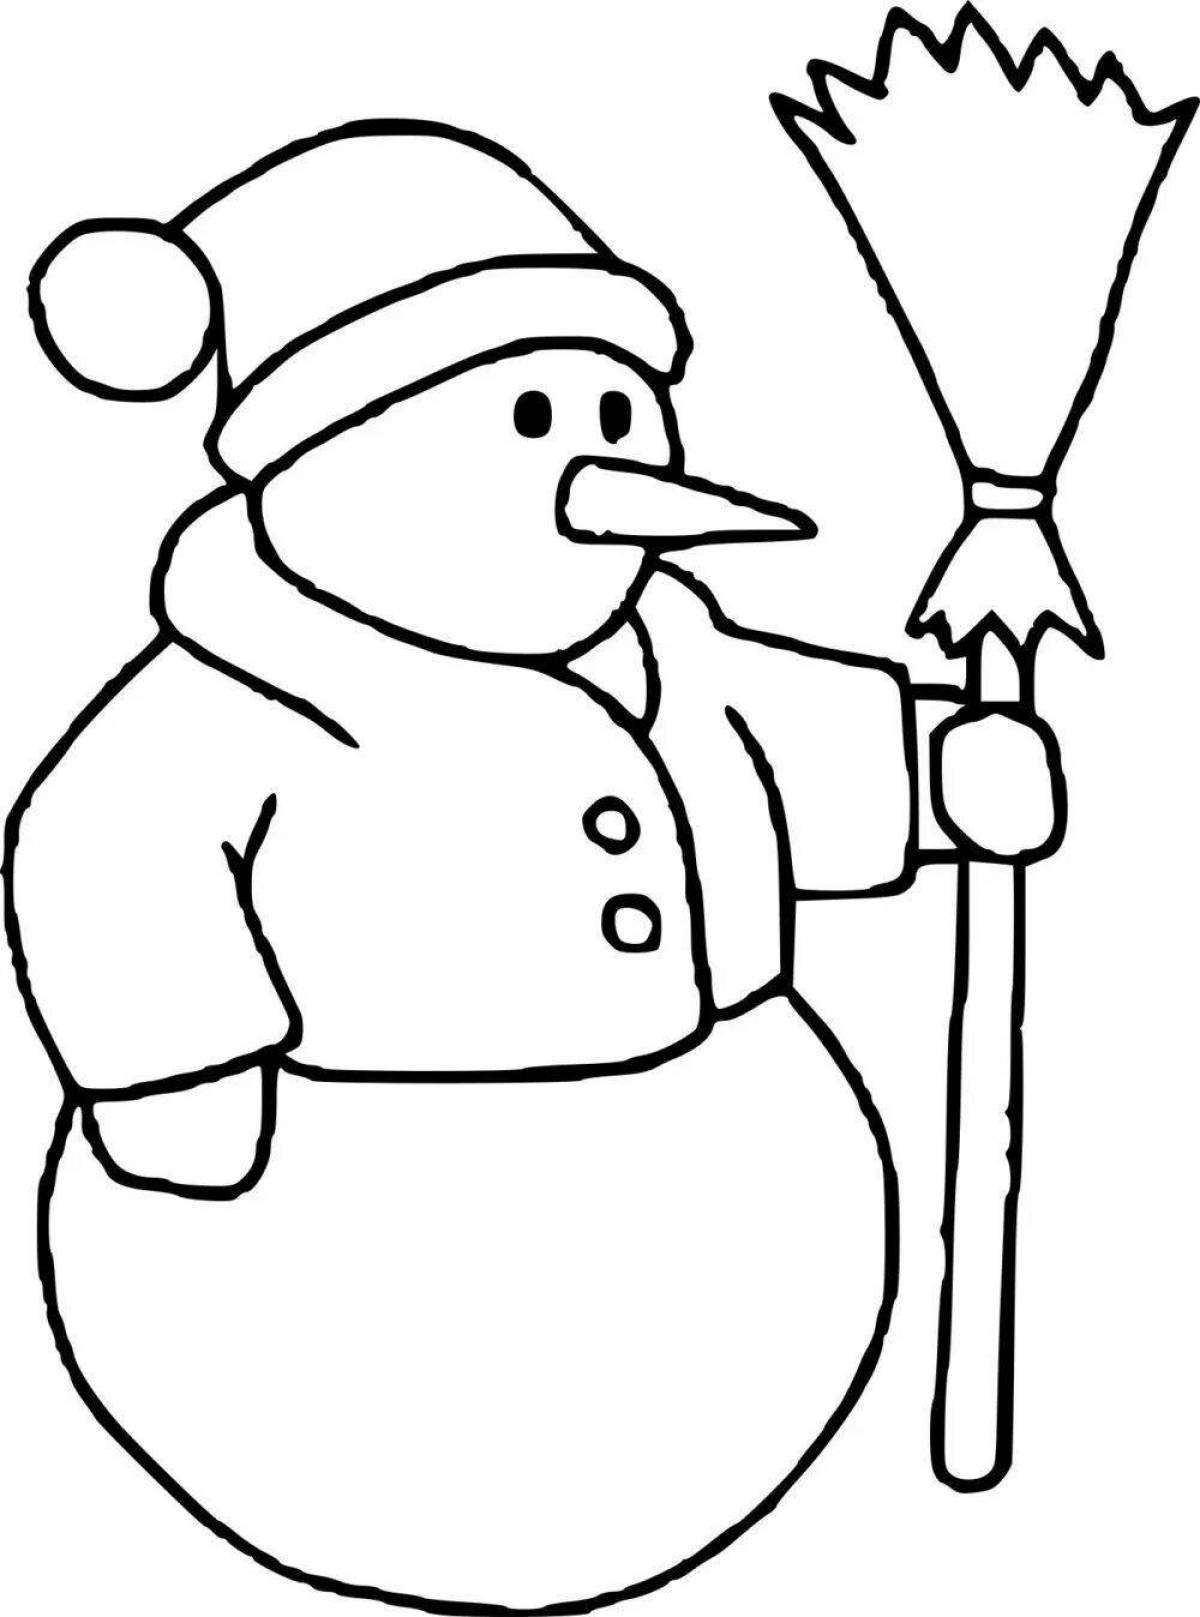 Smart coloring snowman with a broom